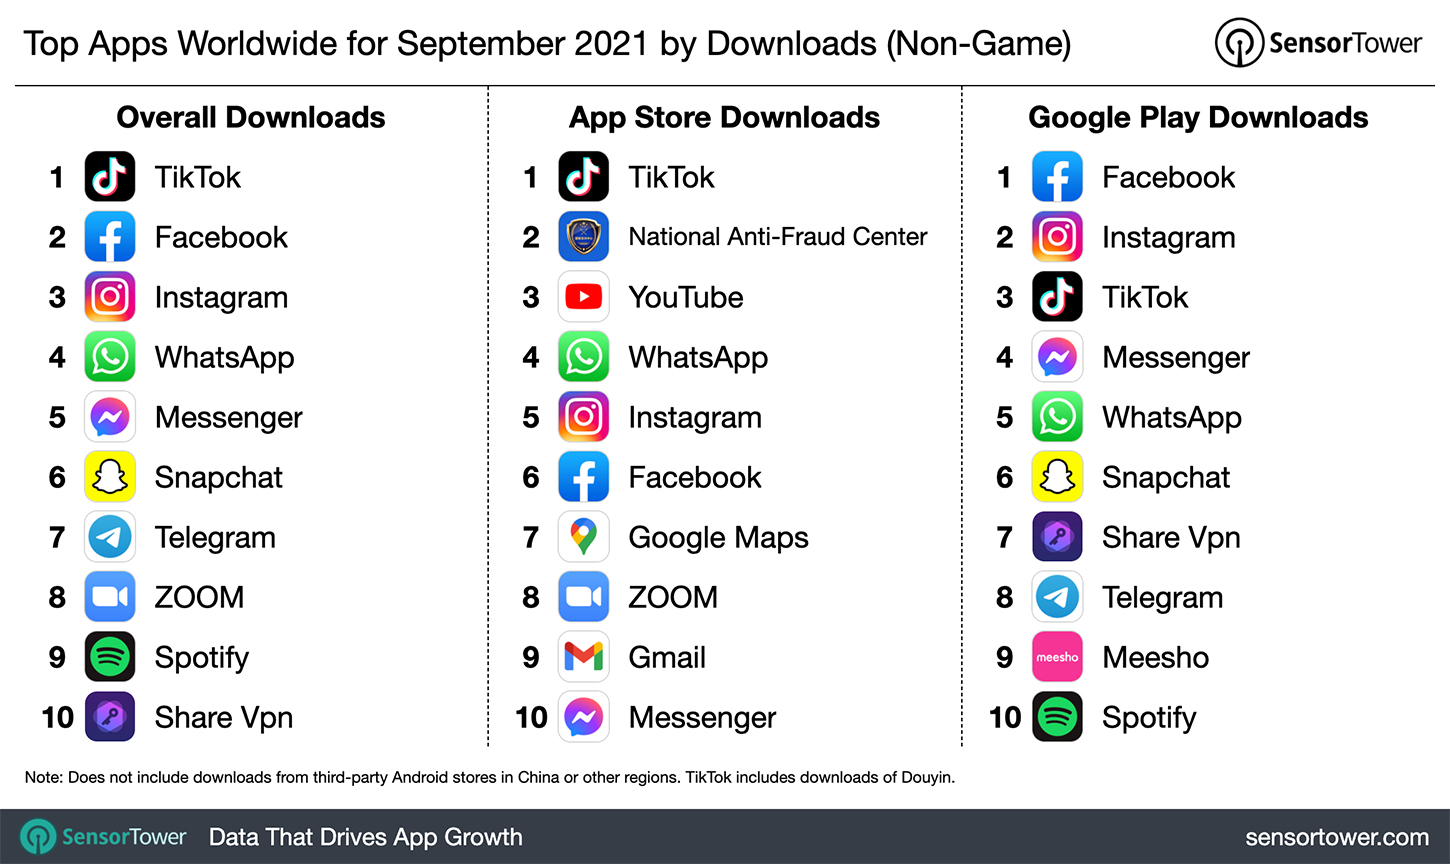 Top Apps for September 2021 by Downloads